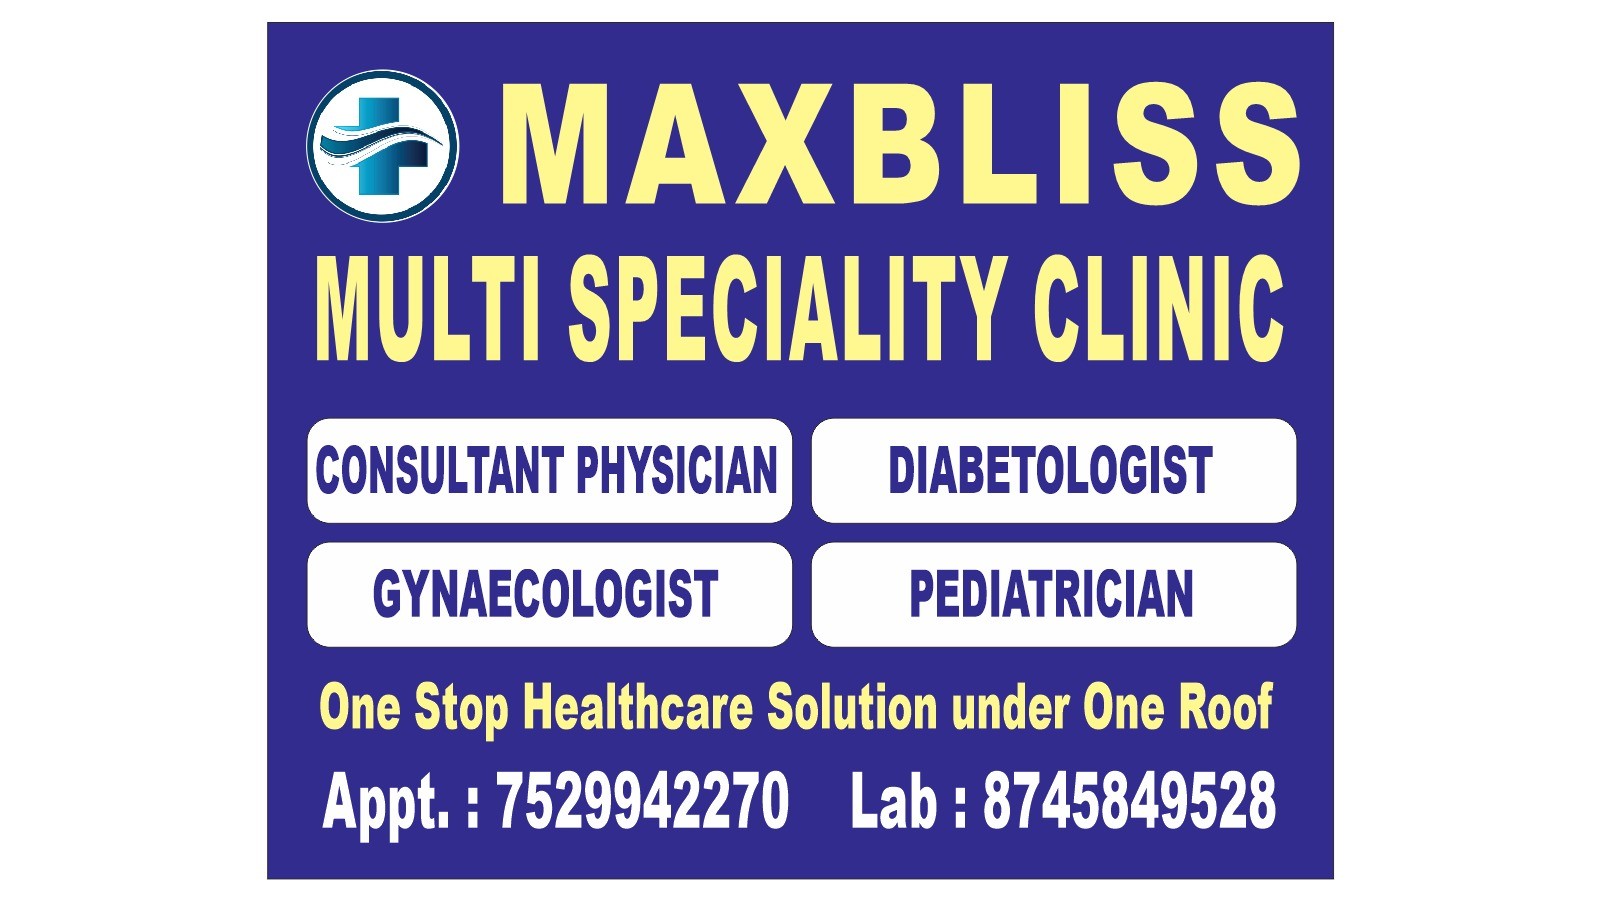 Maxbliss Multi Speciality Clinic - Best General Physician | Diabetologist | Gynaecologist | Pediatrician